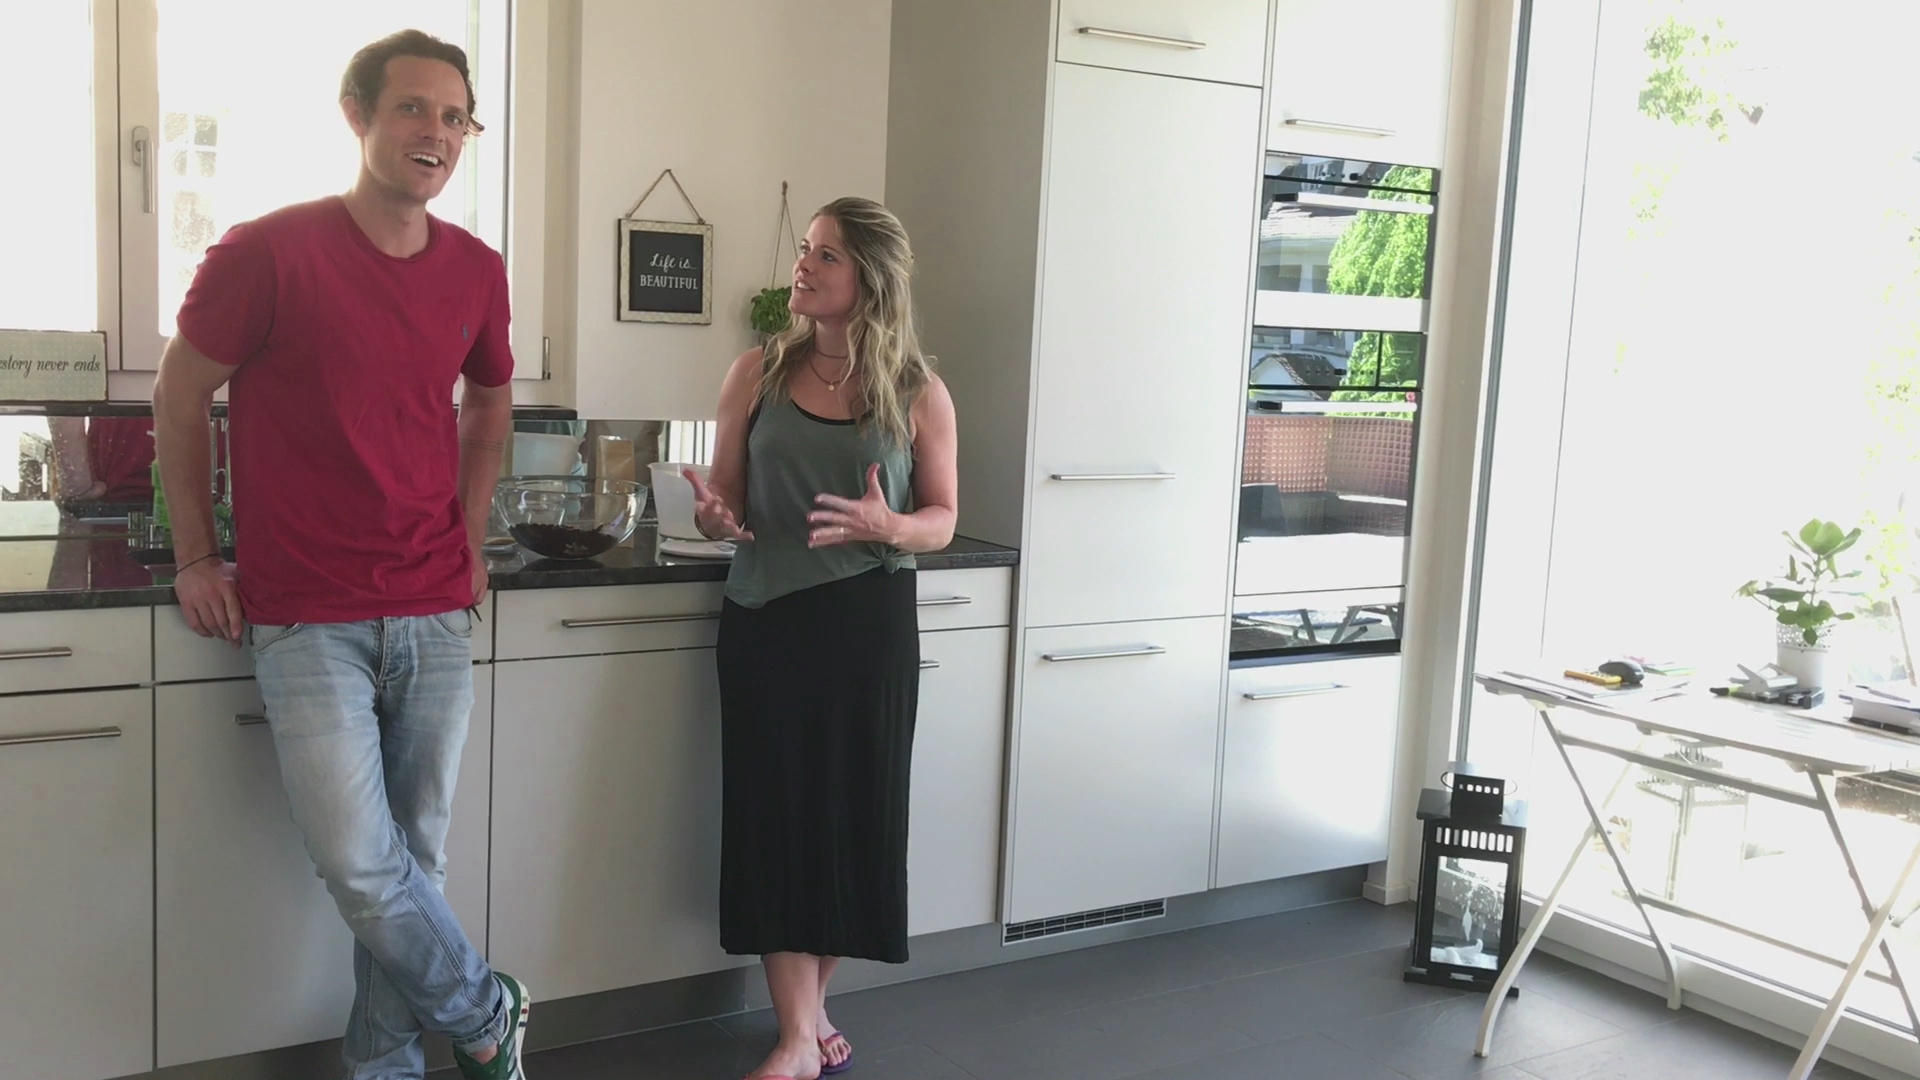 A brother and sister standing in a kitchen